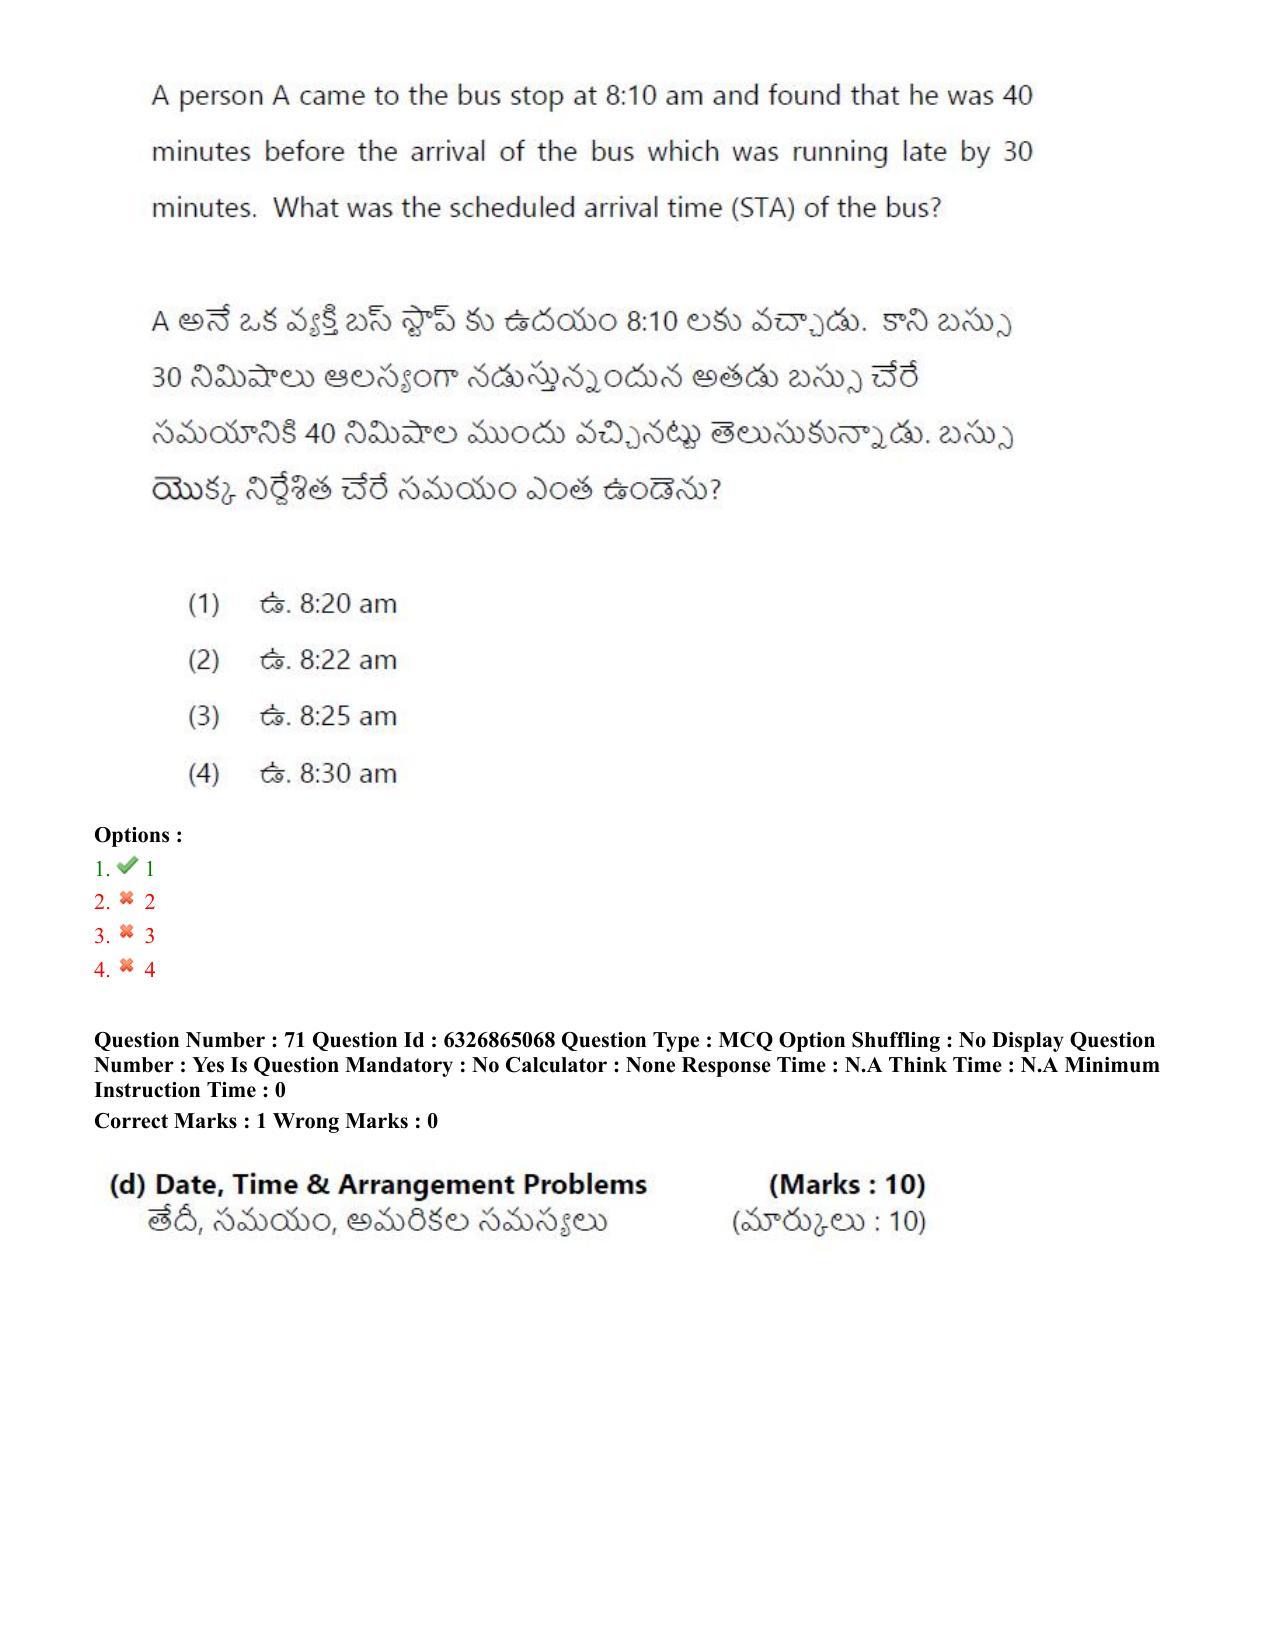 TS ICET 2022 Question Paper 2 - Jul 28, 2022	 - Page 66